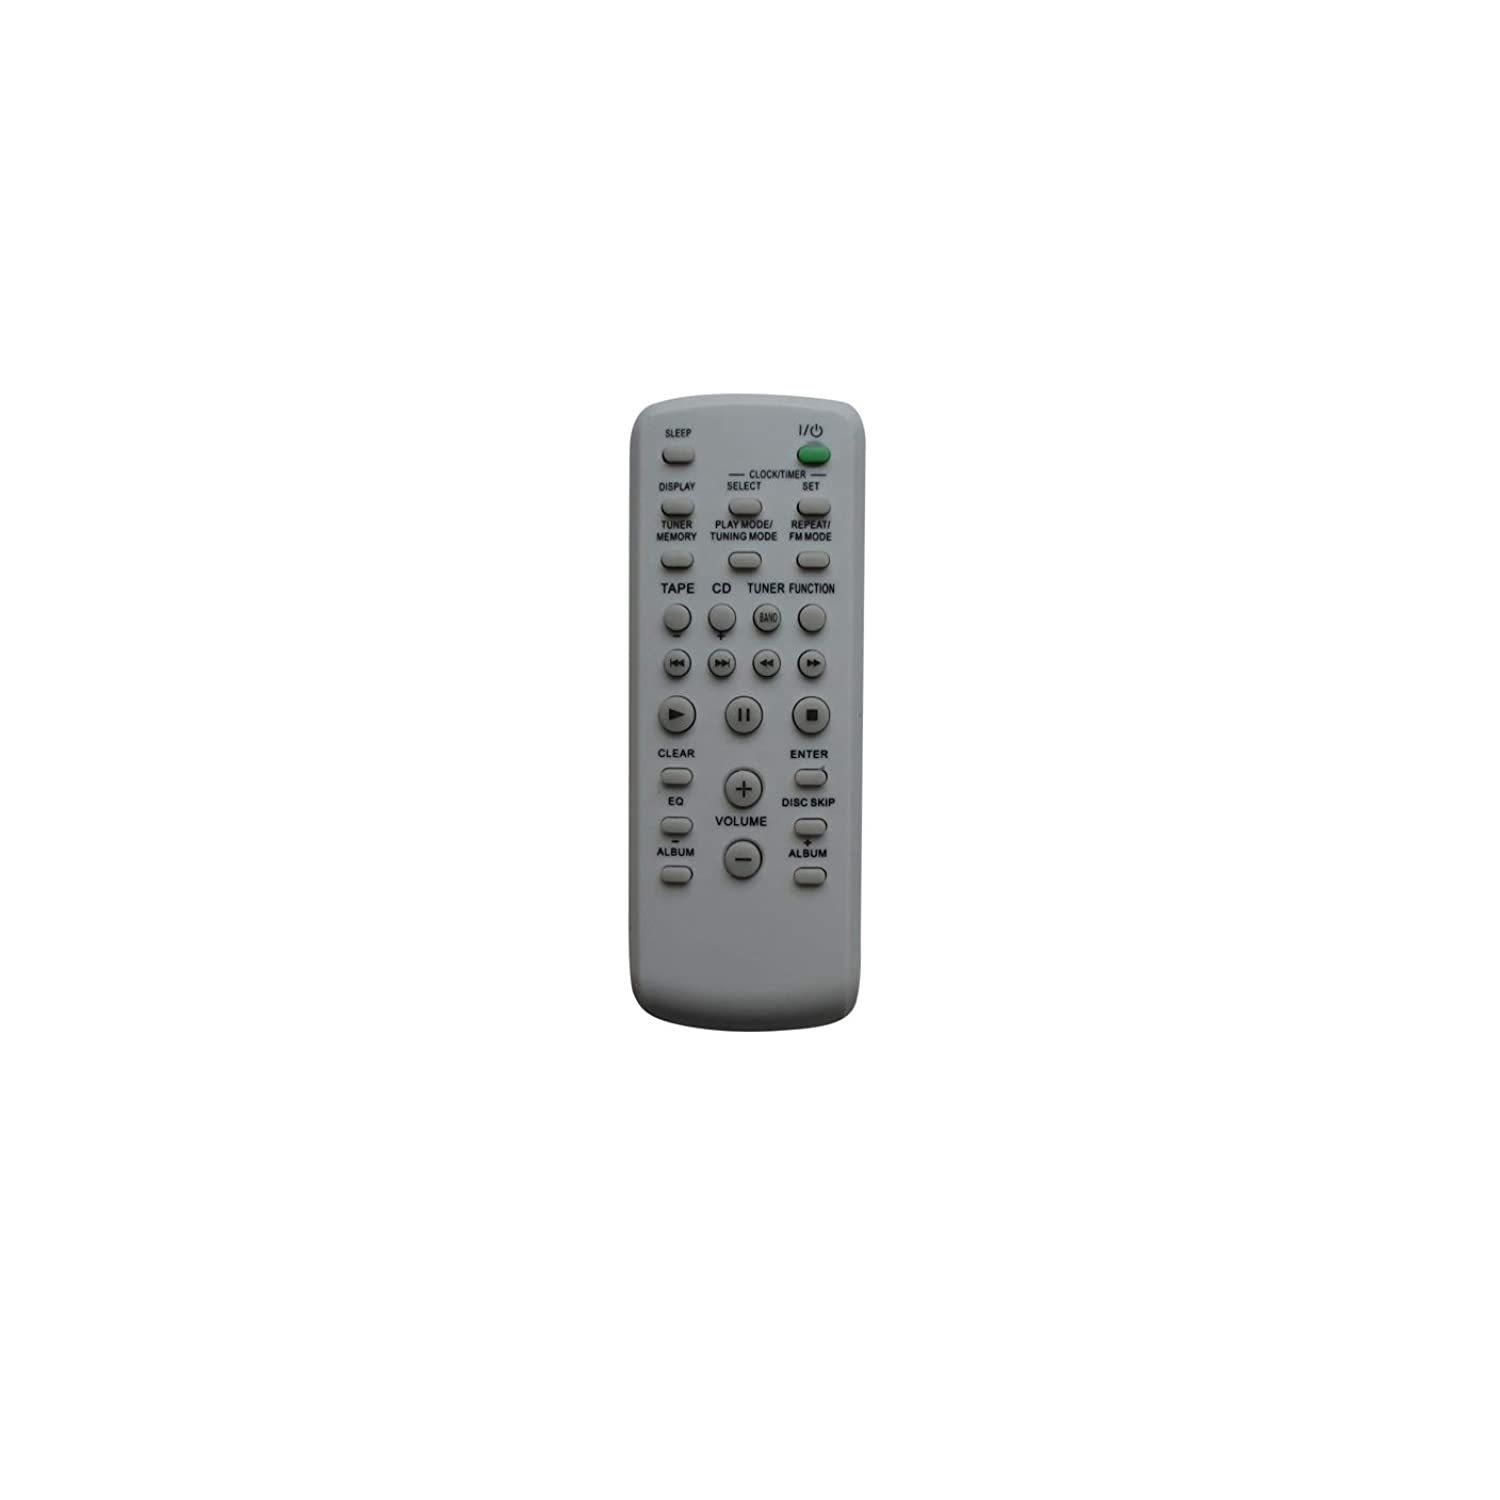 Replacement Remote Control For Sony Rm-Sc50 Mhc-Rg295 Hcd-Rg295 Mhc-Gx47..